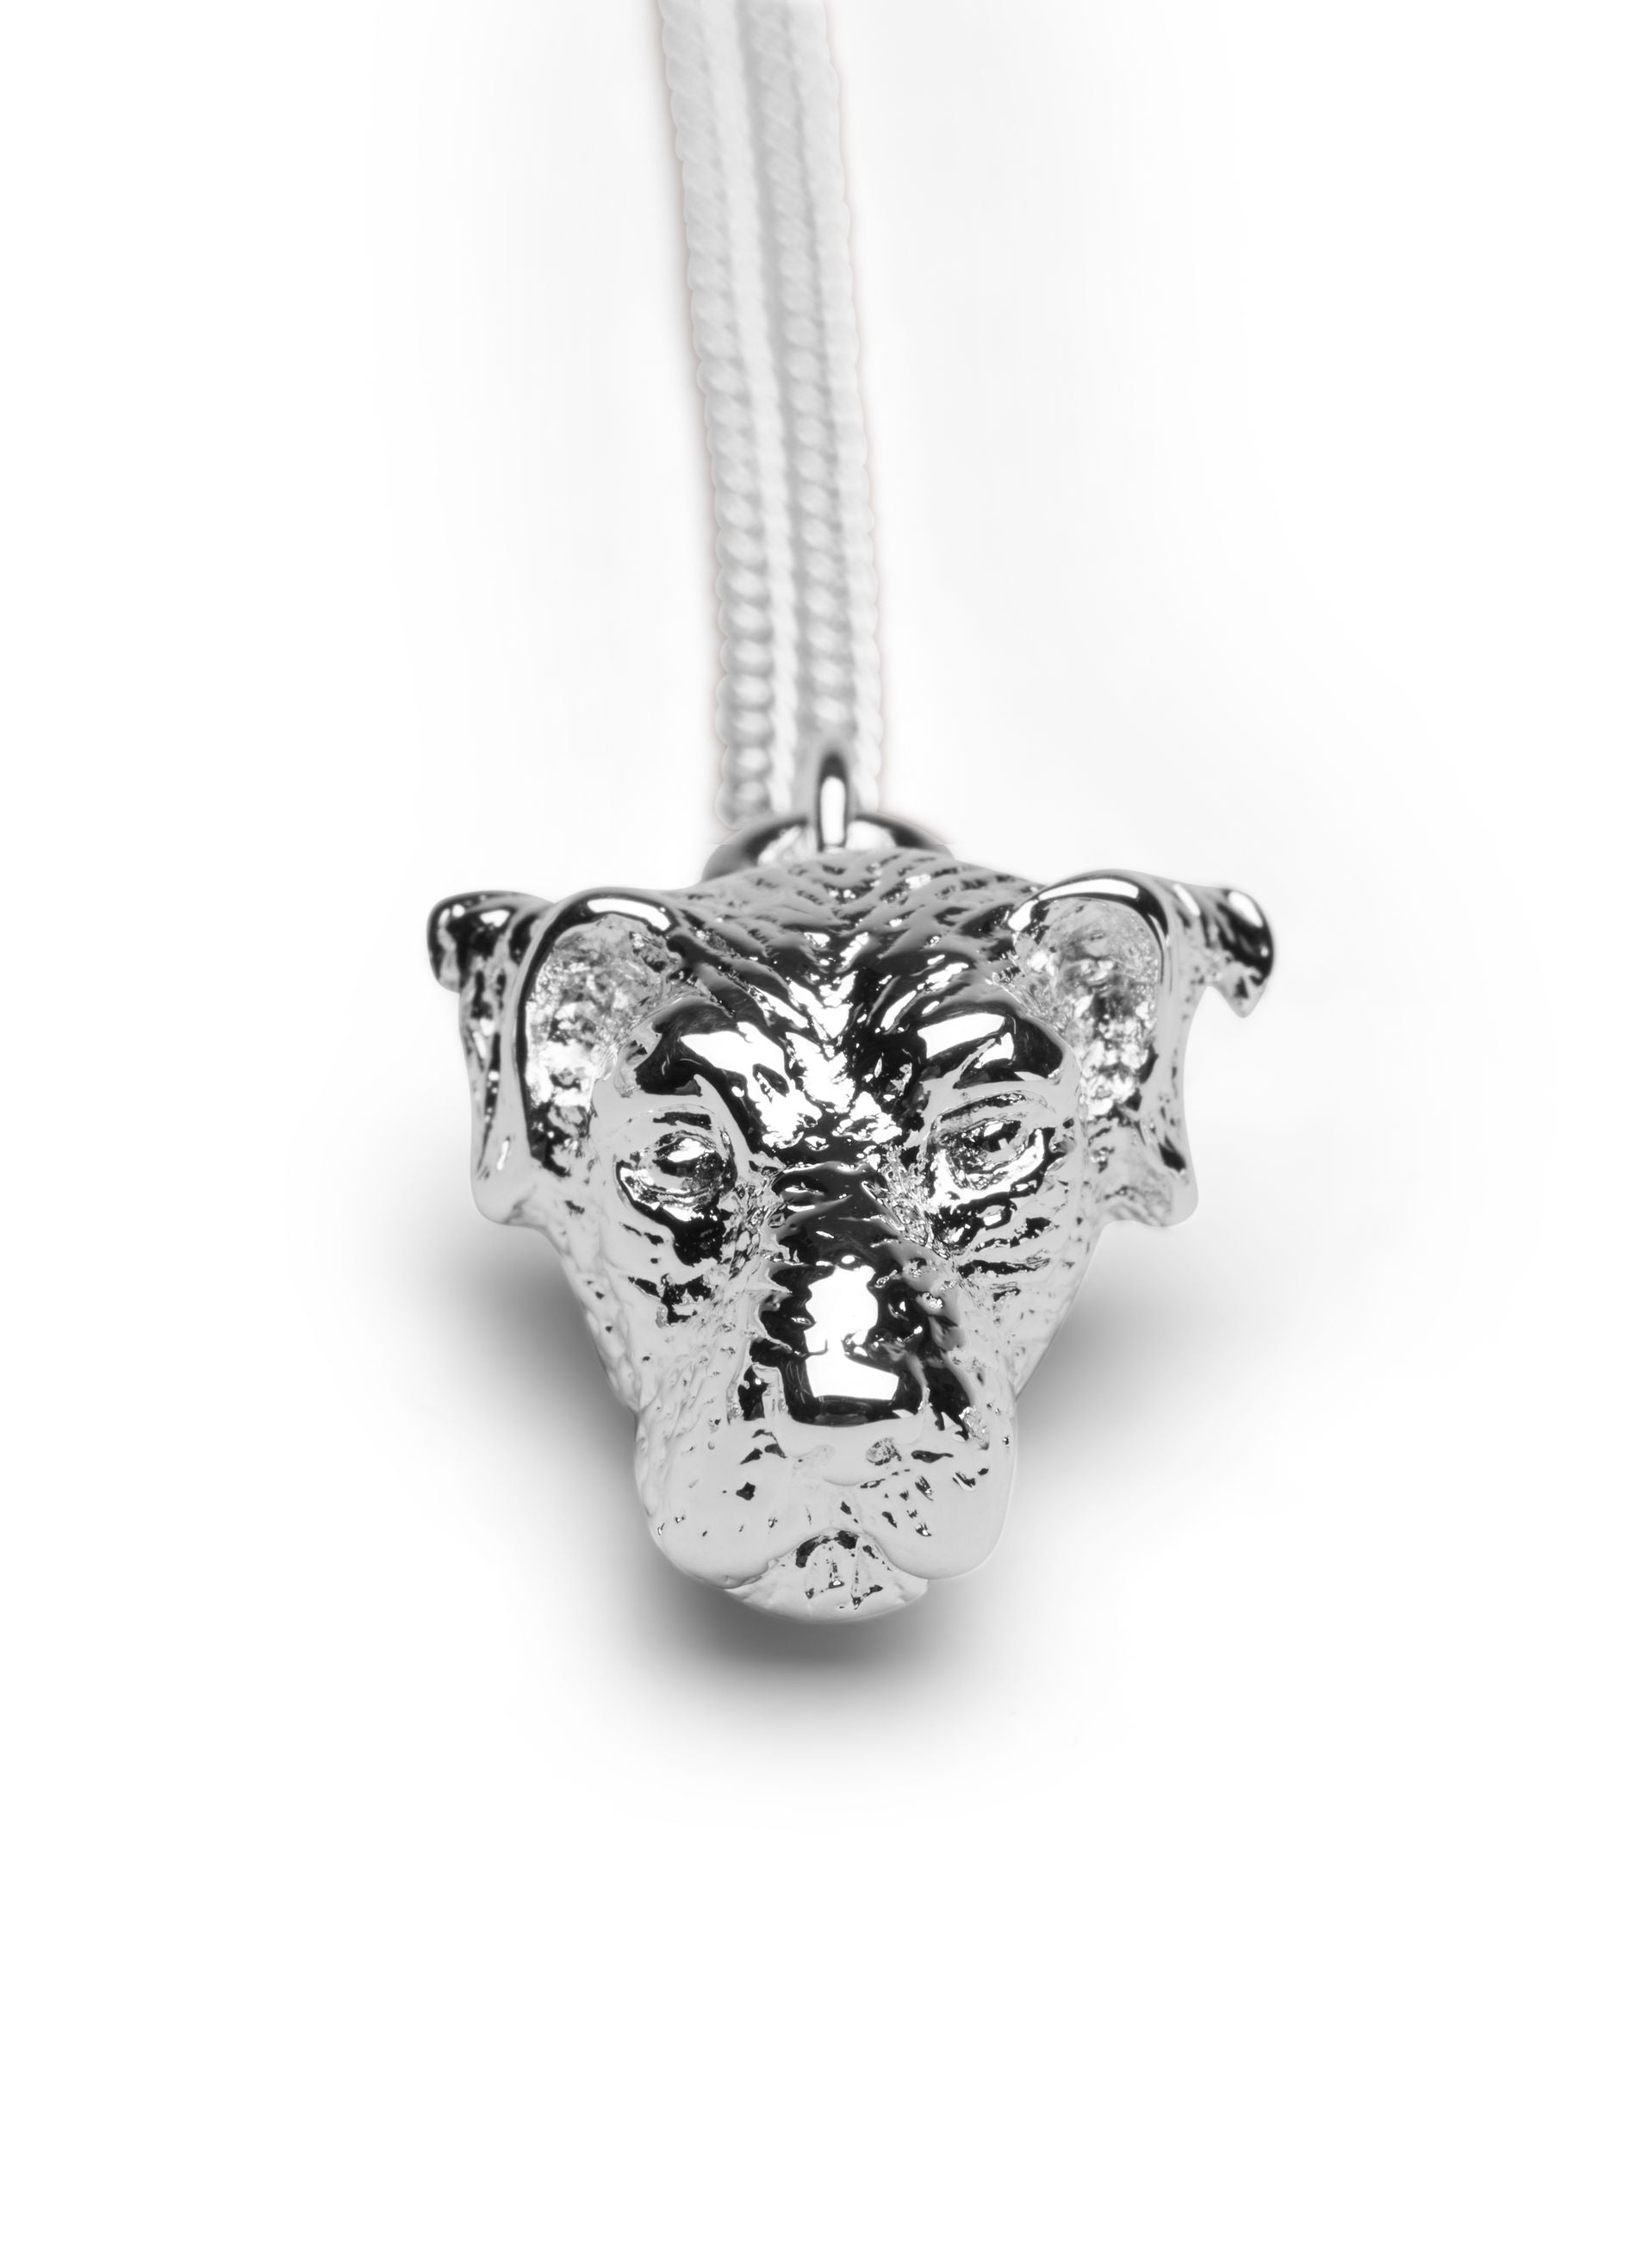 Skultuna Terrier Necklace, Silver Plated